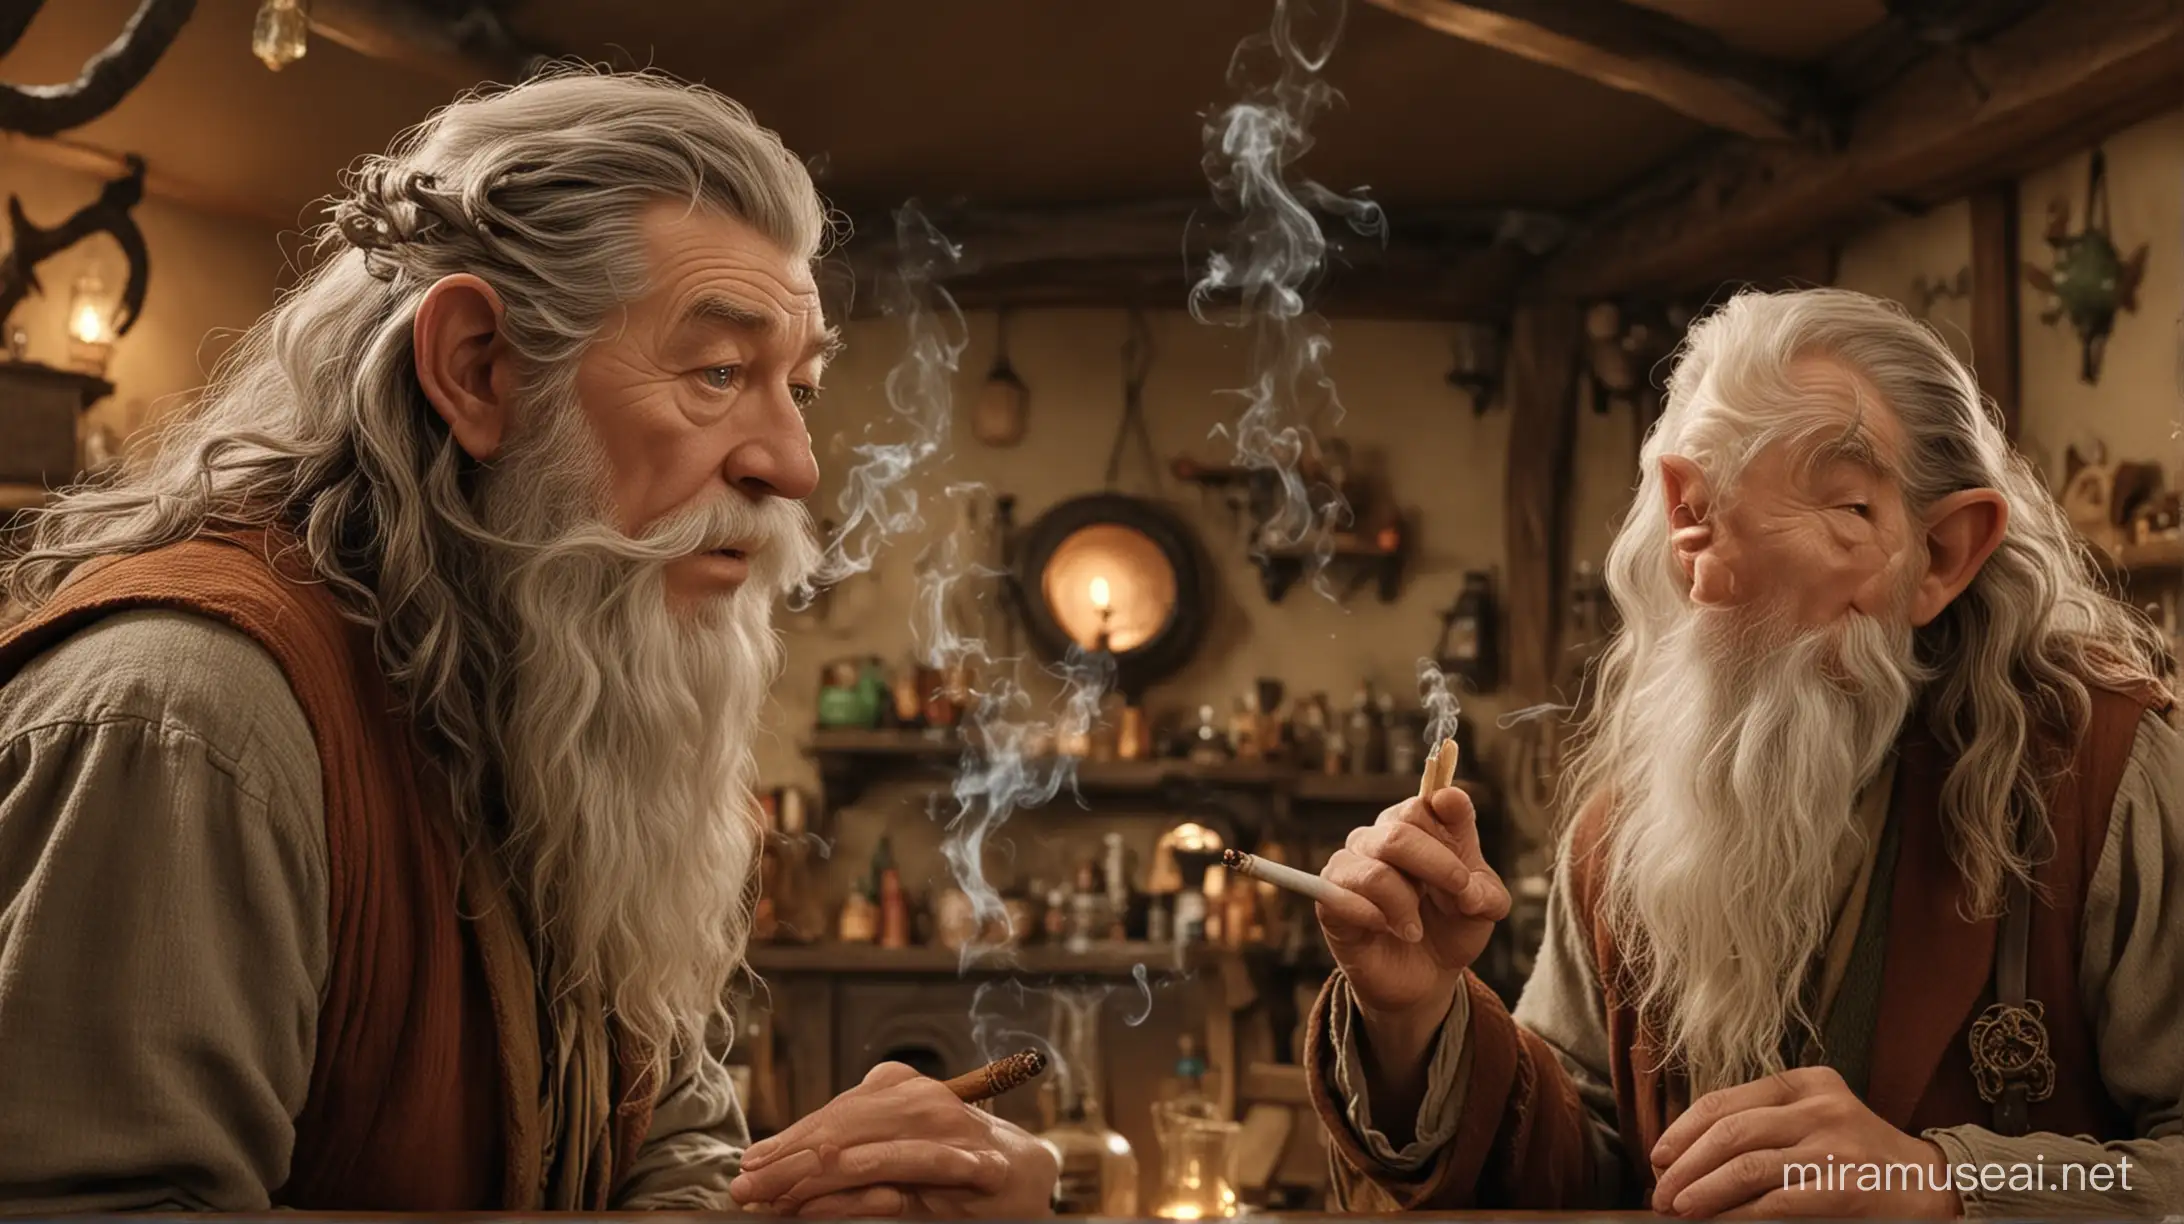 Gandalf and Bilbo Baggins smoking drugs and seeing hallucinations in Bilbo's house, correct anatomy, psychedelic dragons, naked dwarves dancing around